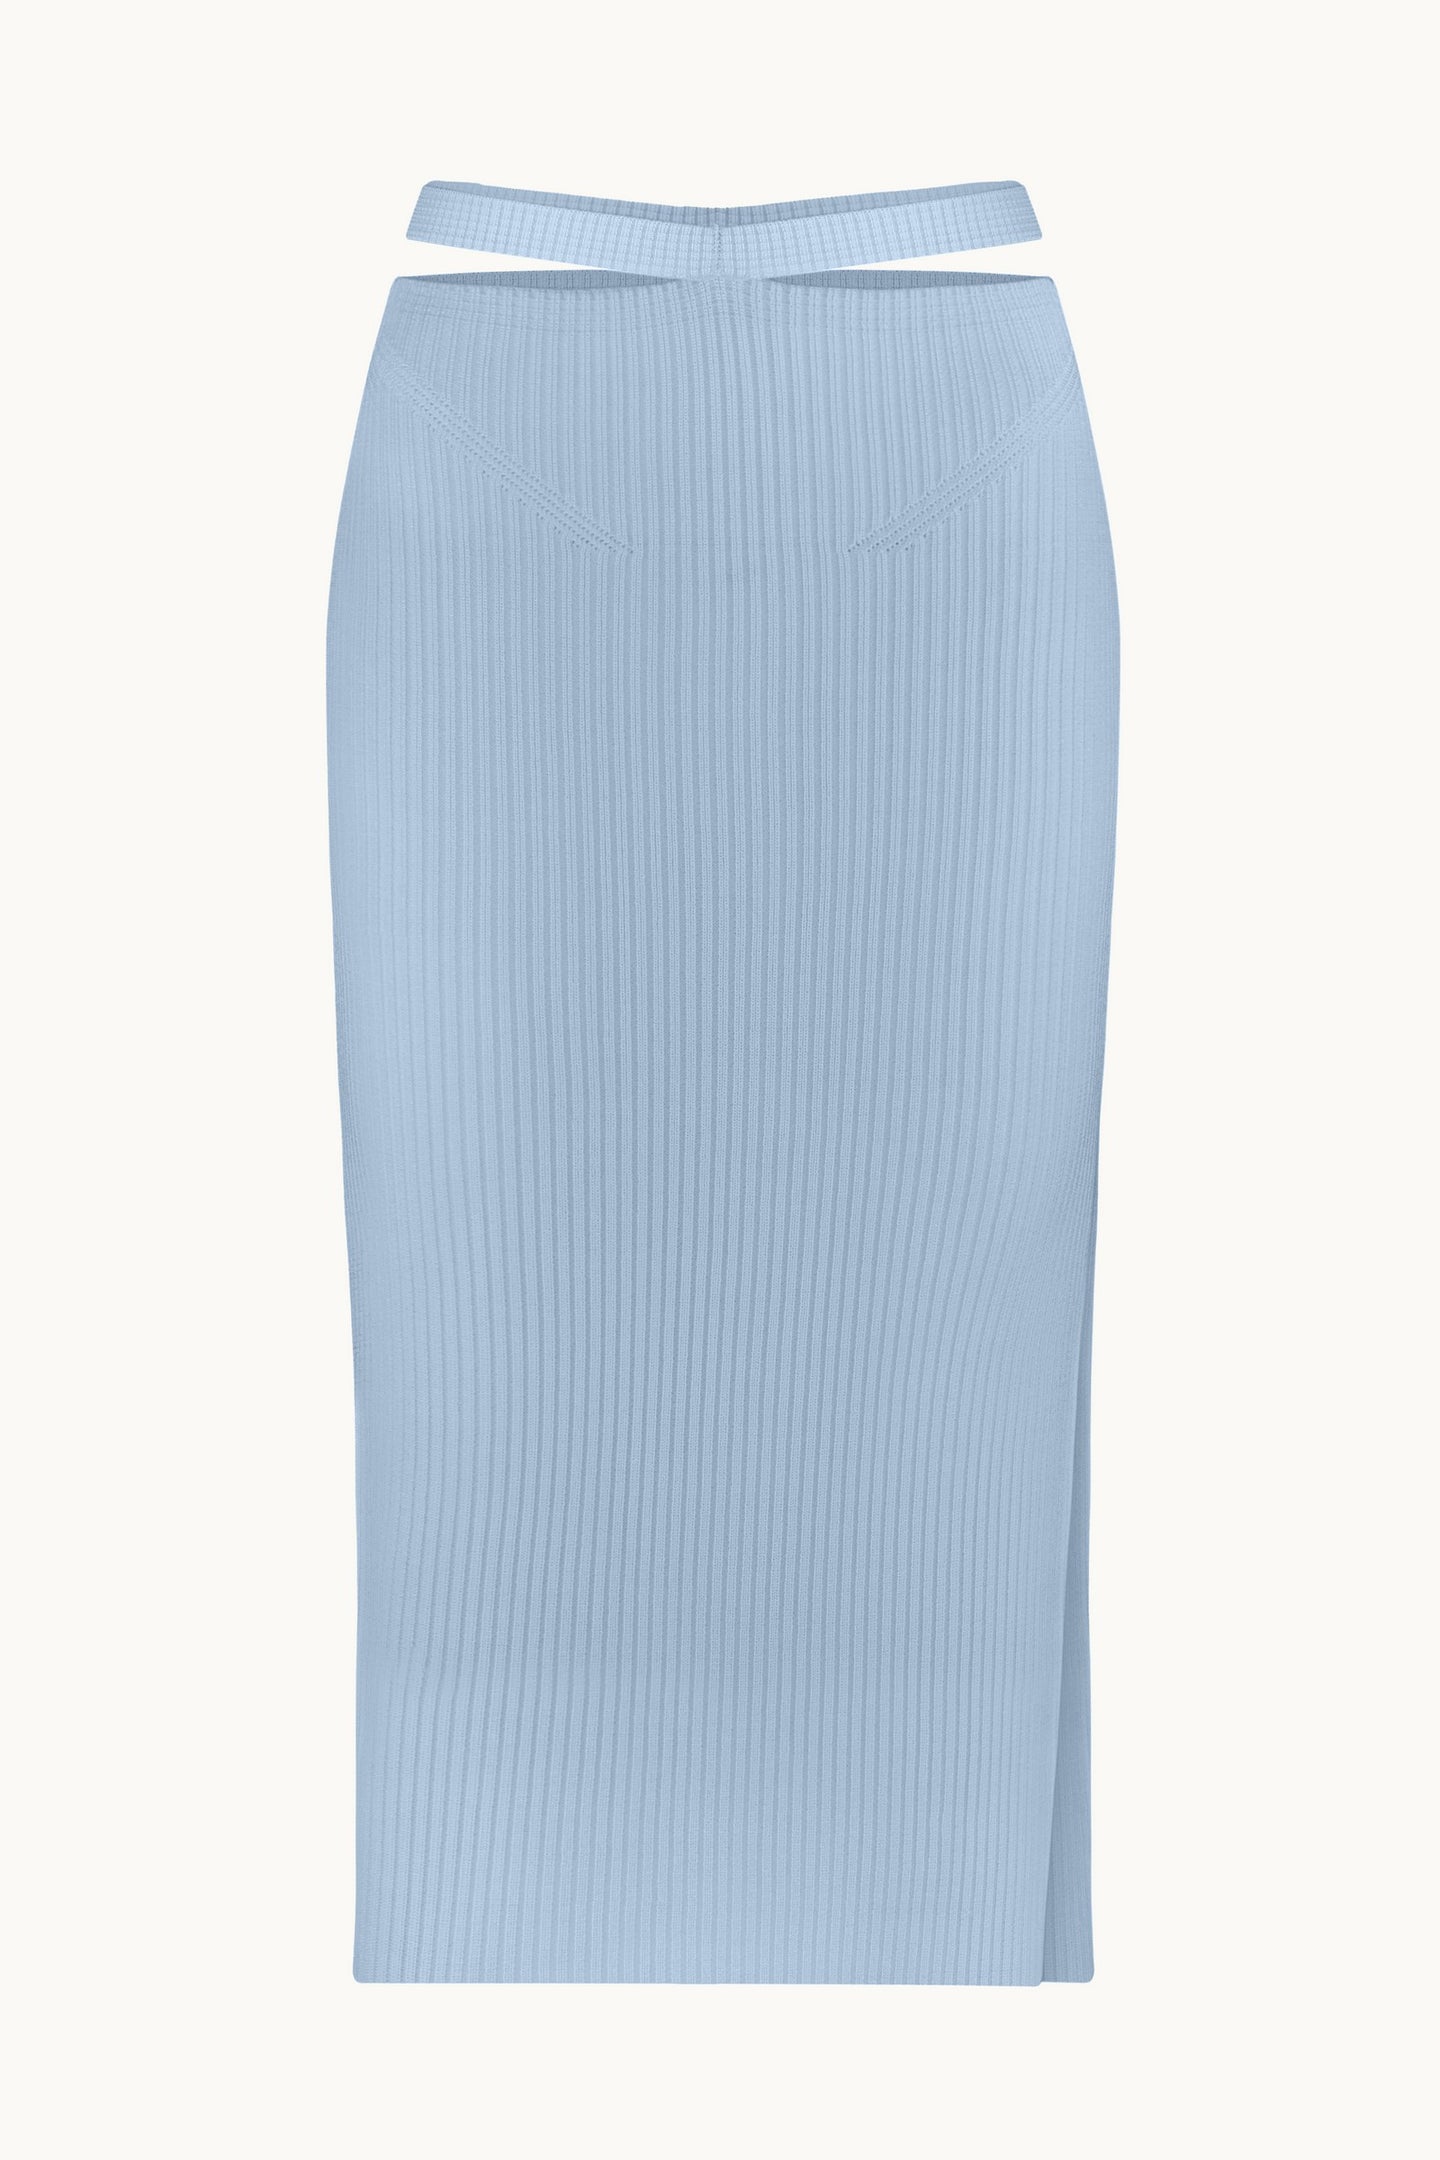 Alizee baby blue skirt front view